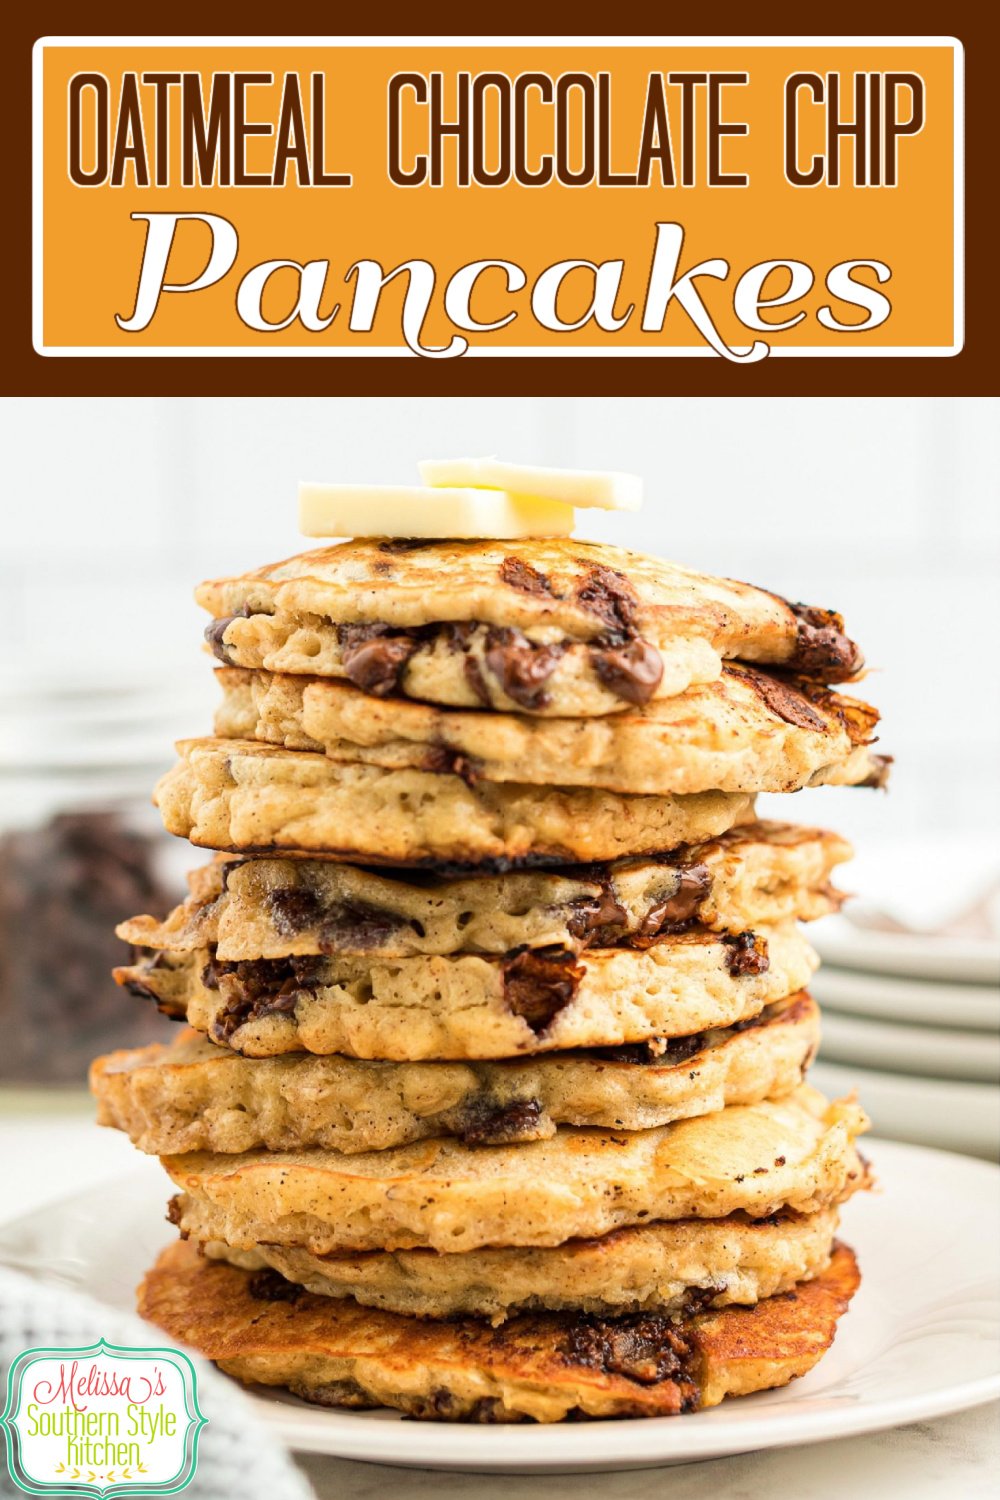 Enjoy a stack of homemade Oatmeal Chocolate Chip Pancakes topped with butter and a drizzle of syrup to kick start your day #oatmealpanckaes #pancakerecipes #oatmealchocolatechip #chocolatechippancakes #oatmealchocolatechippanckes #brunch #breakfast #southernrecipes via @melissasssk